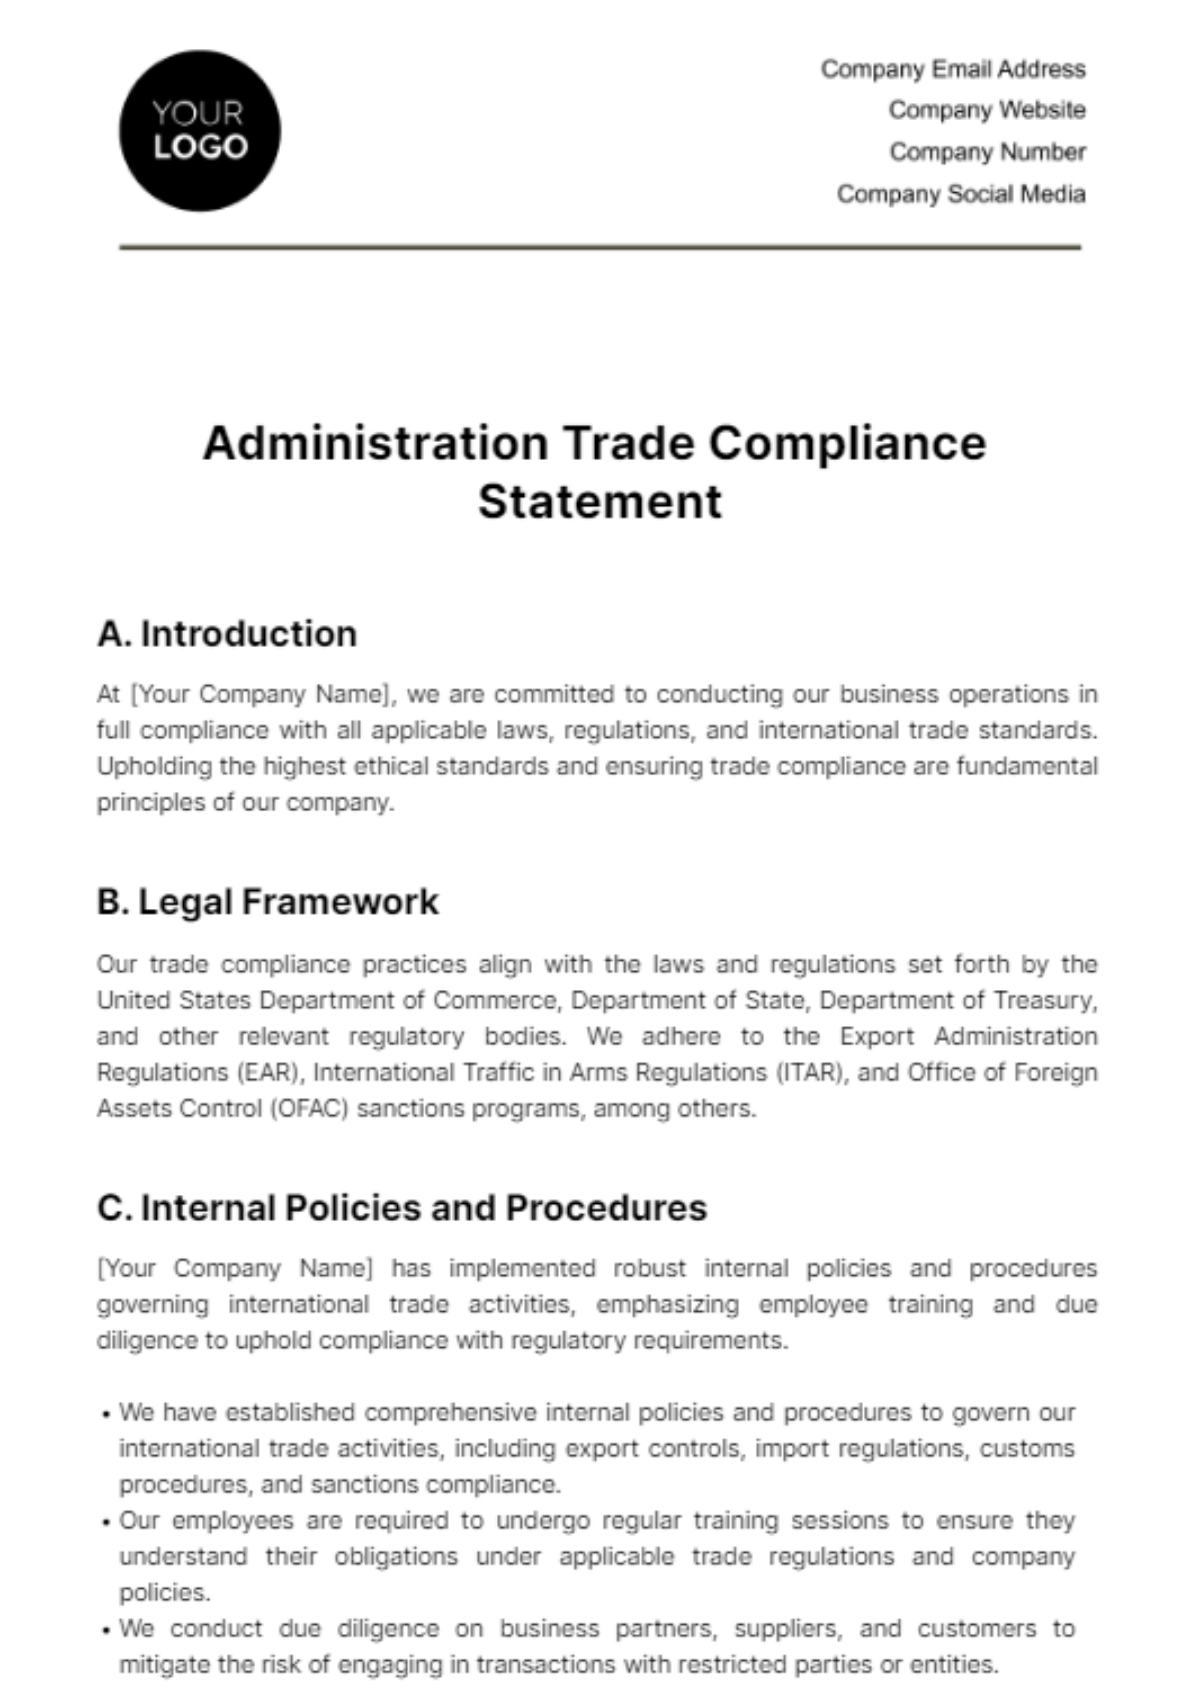 Administration Trade Compliance Statement Template